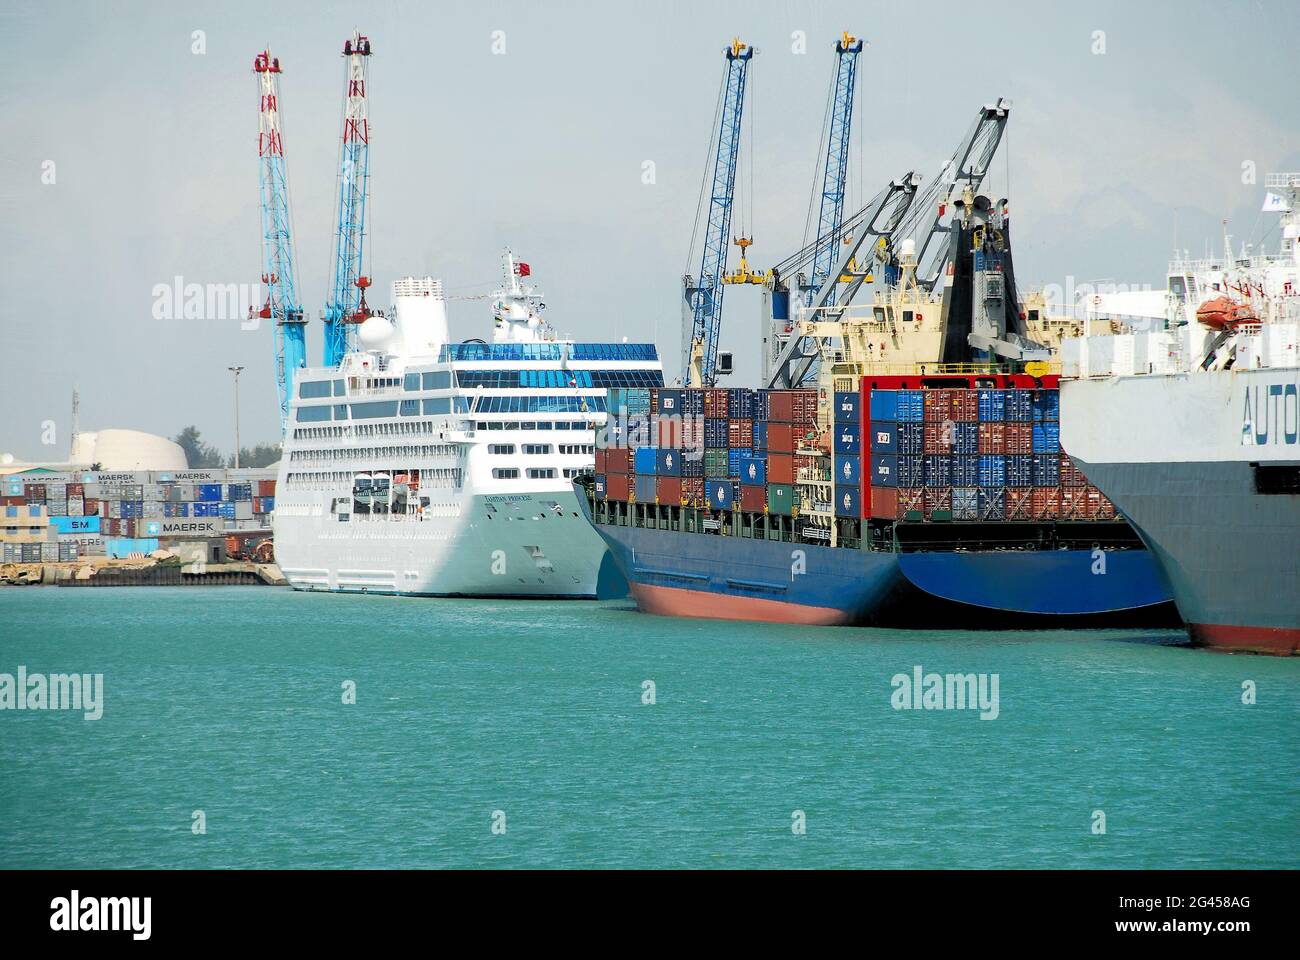 Ships docked at the tropical turquoise waters of  the Autonomous Port of Cotonou, Benin, West Africa on a sunny day. Stock Photo